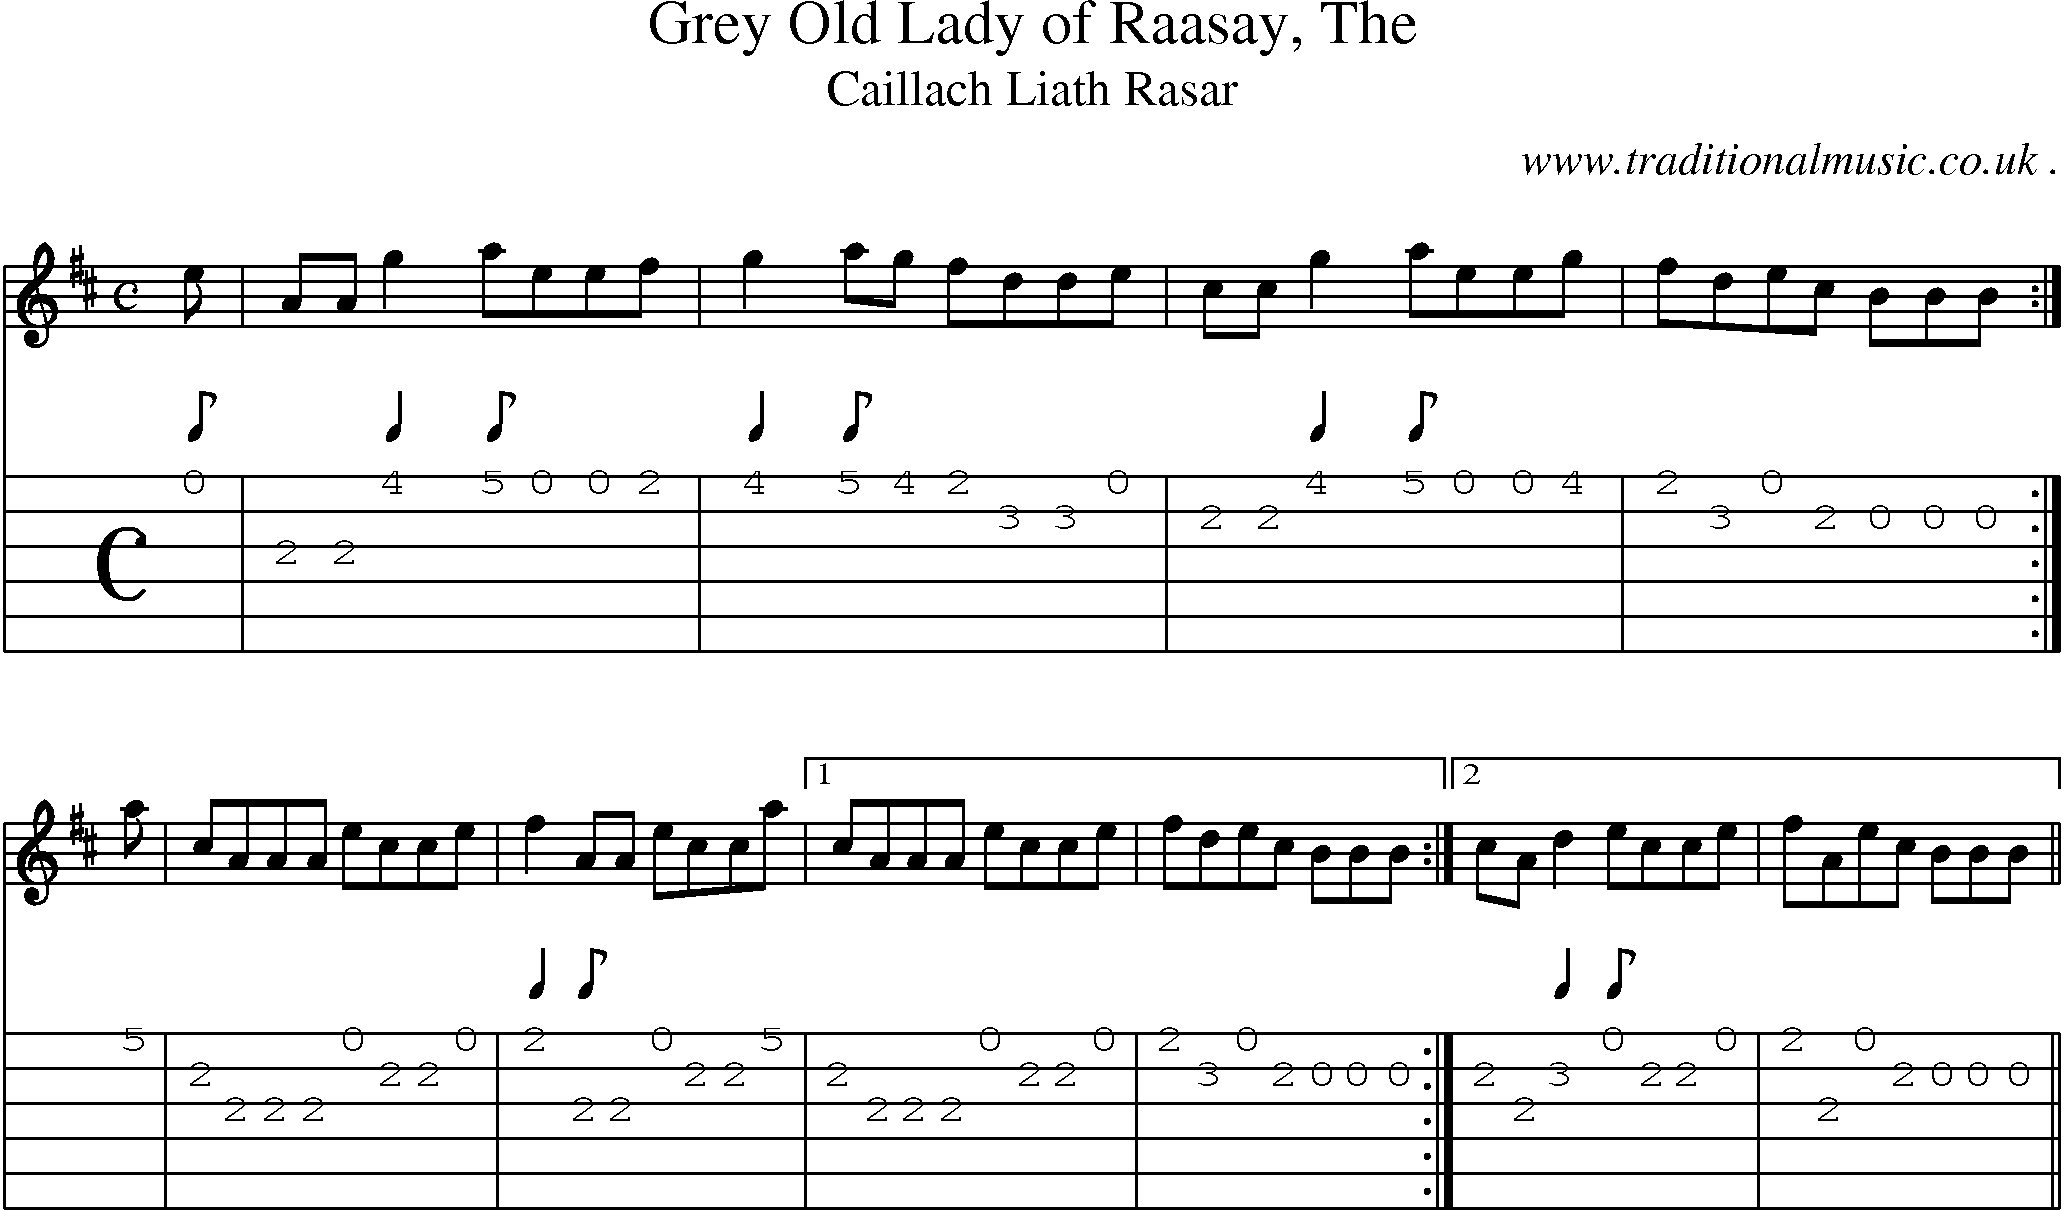 Sheet-music  score, Chords and Guitar Tabs for Grey Old Lady Of Raasay The